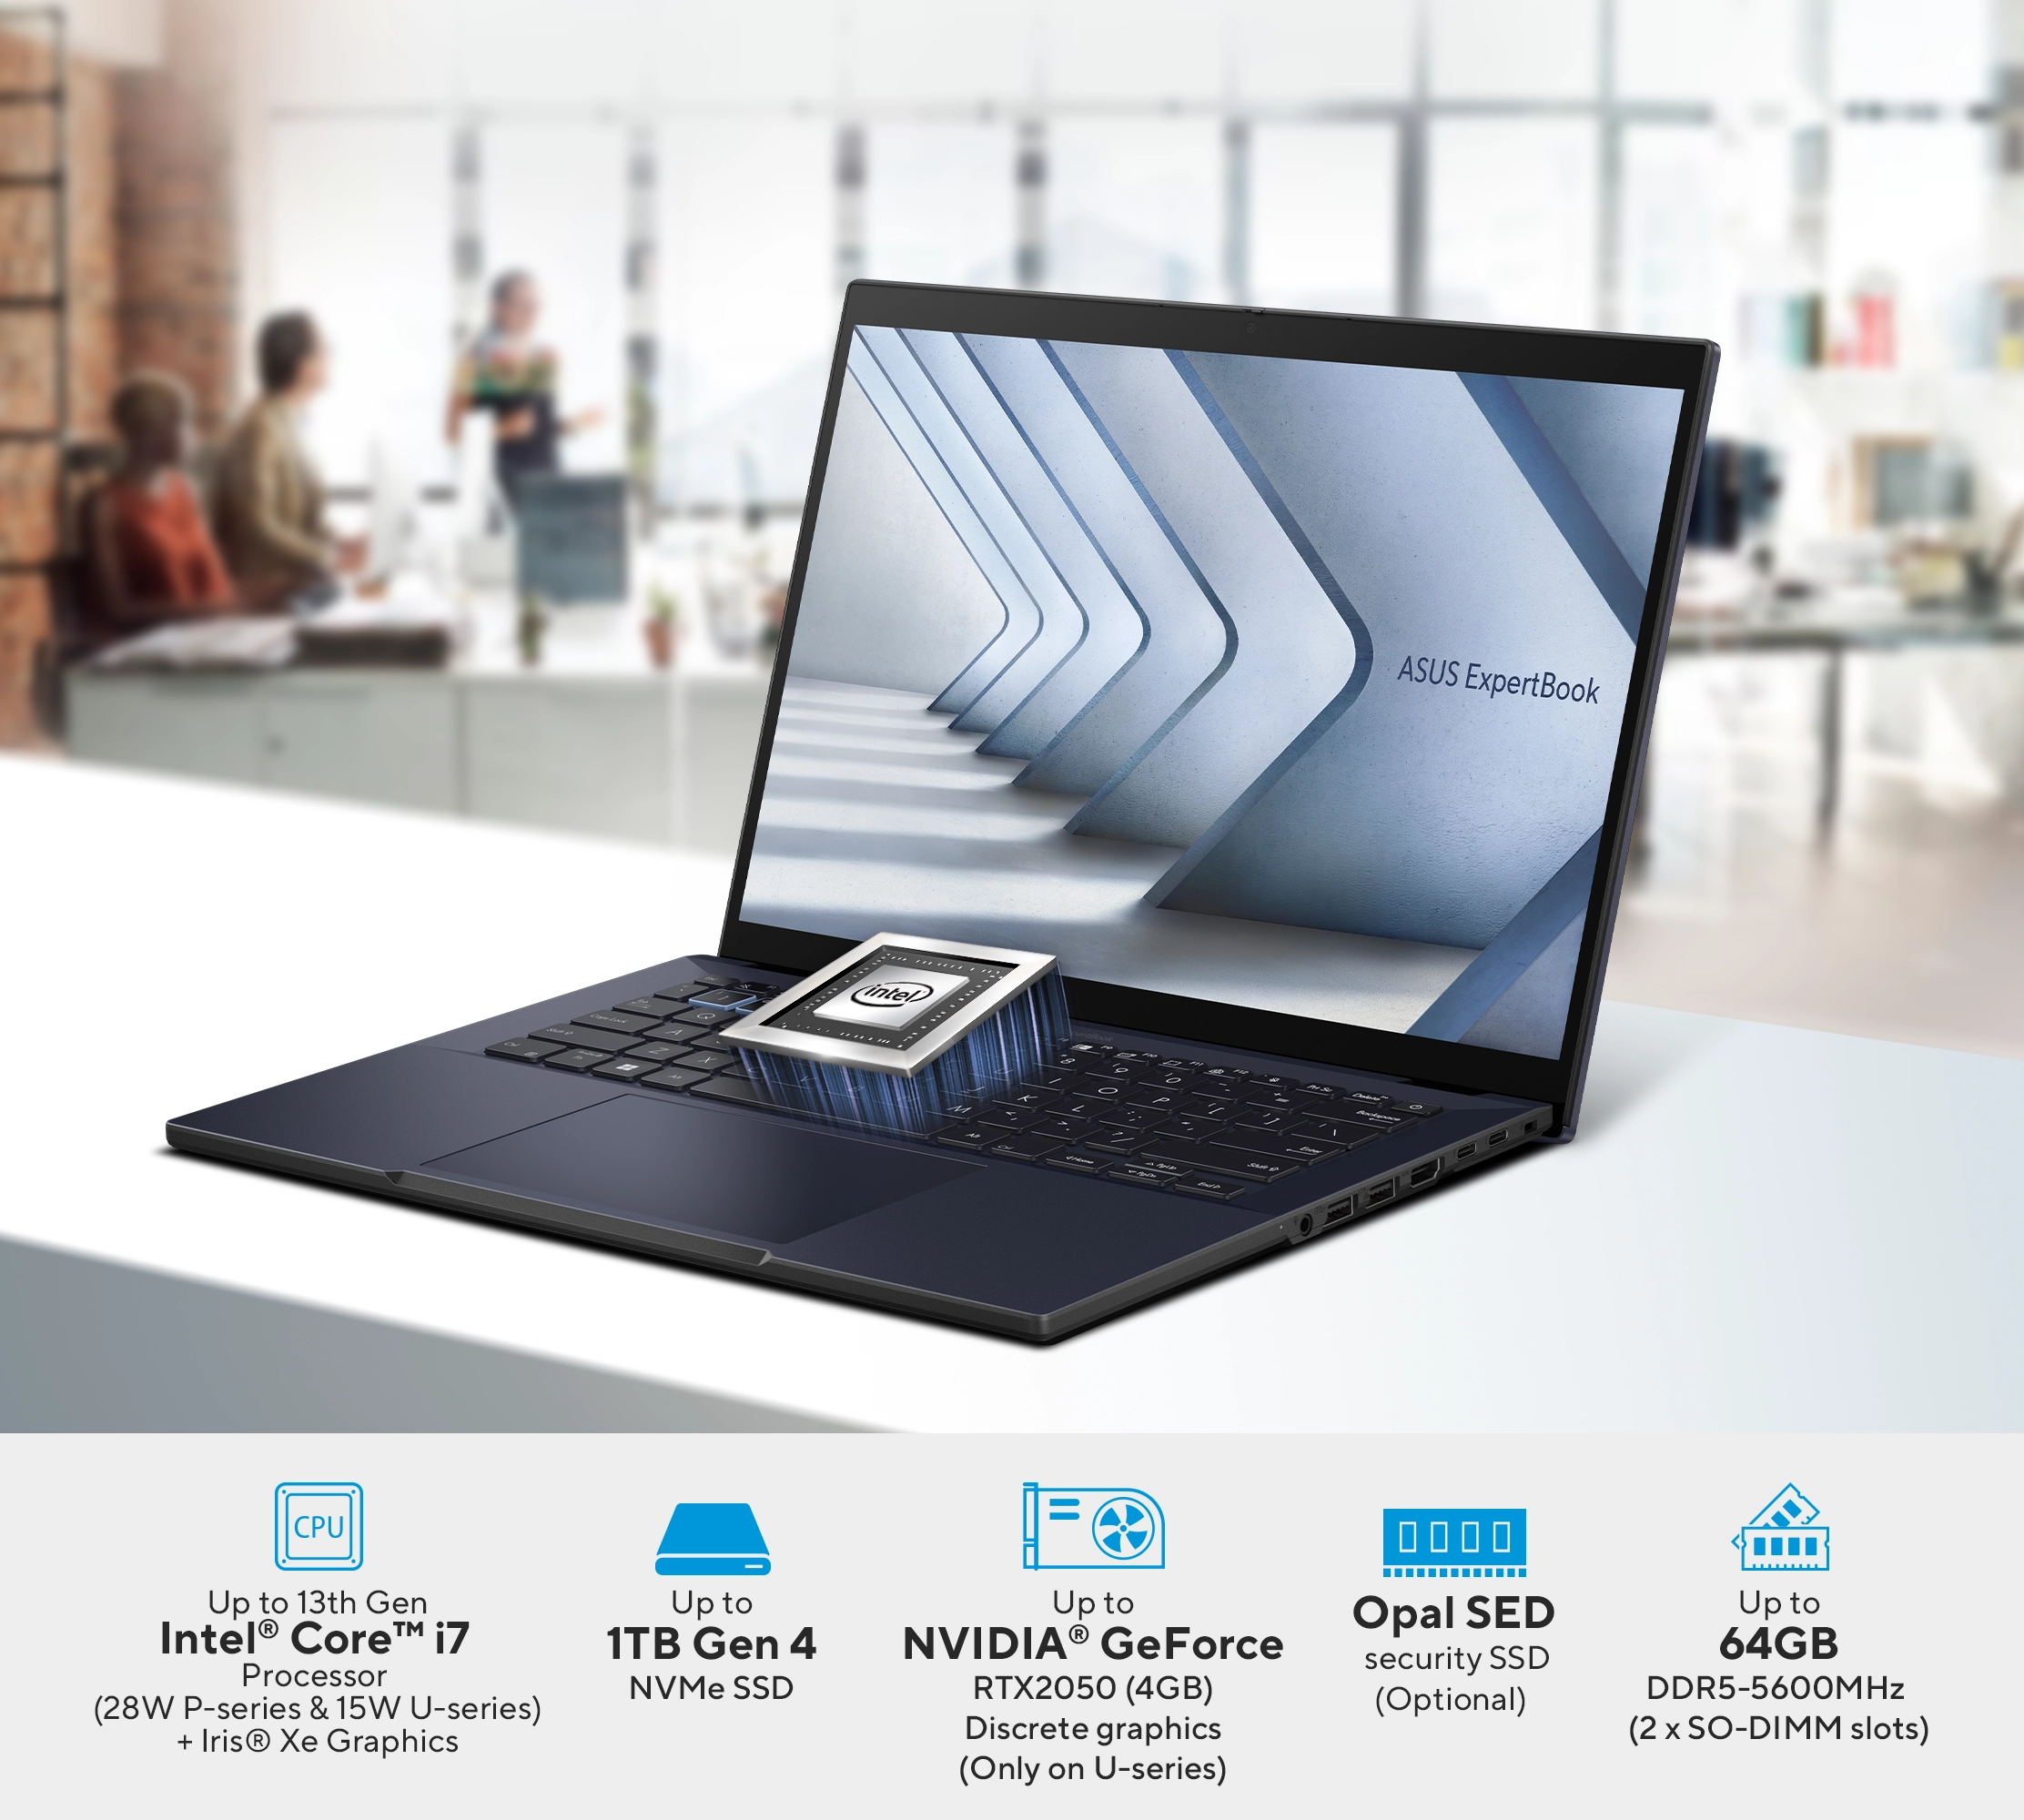 Experience exceptional performance with the ASUS ExpertBook B3404, powered by up to 13th Gen Intel® Core™ i7 Processor